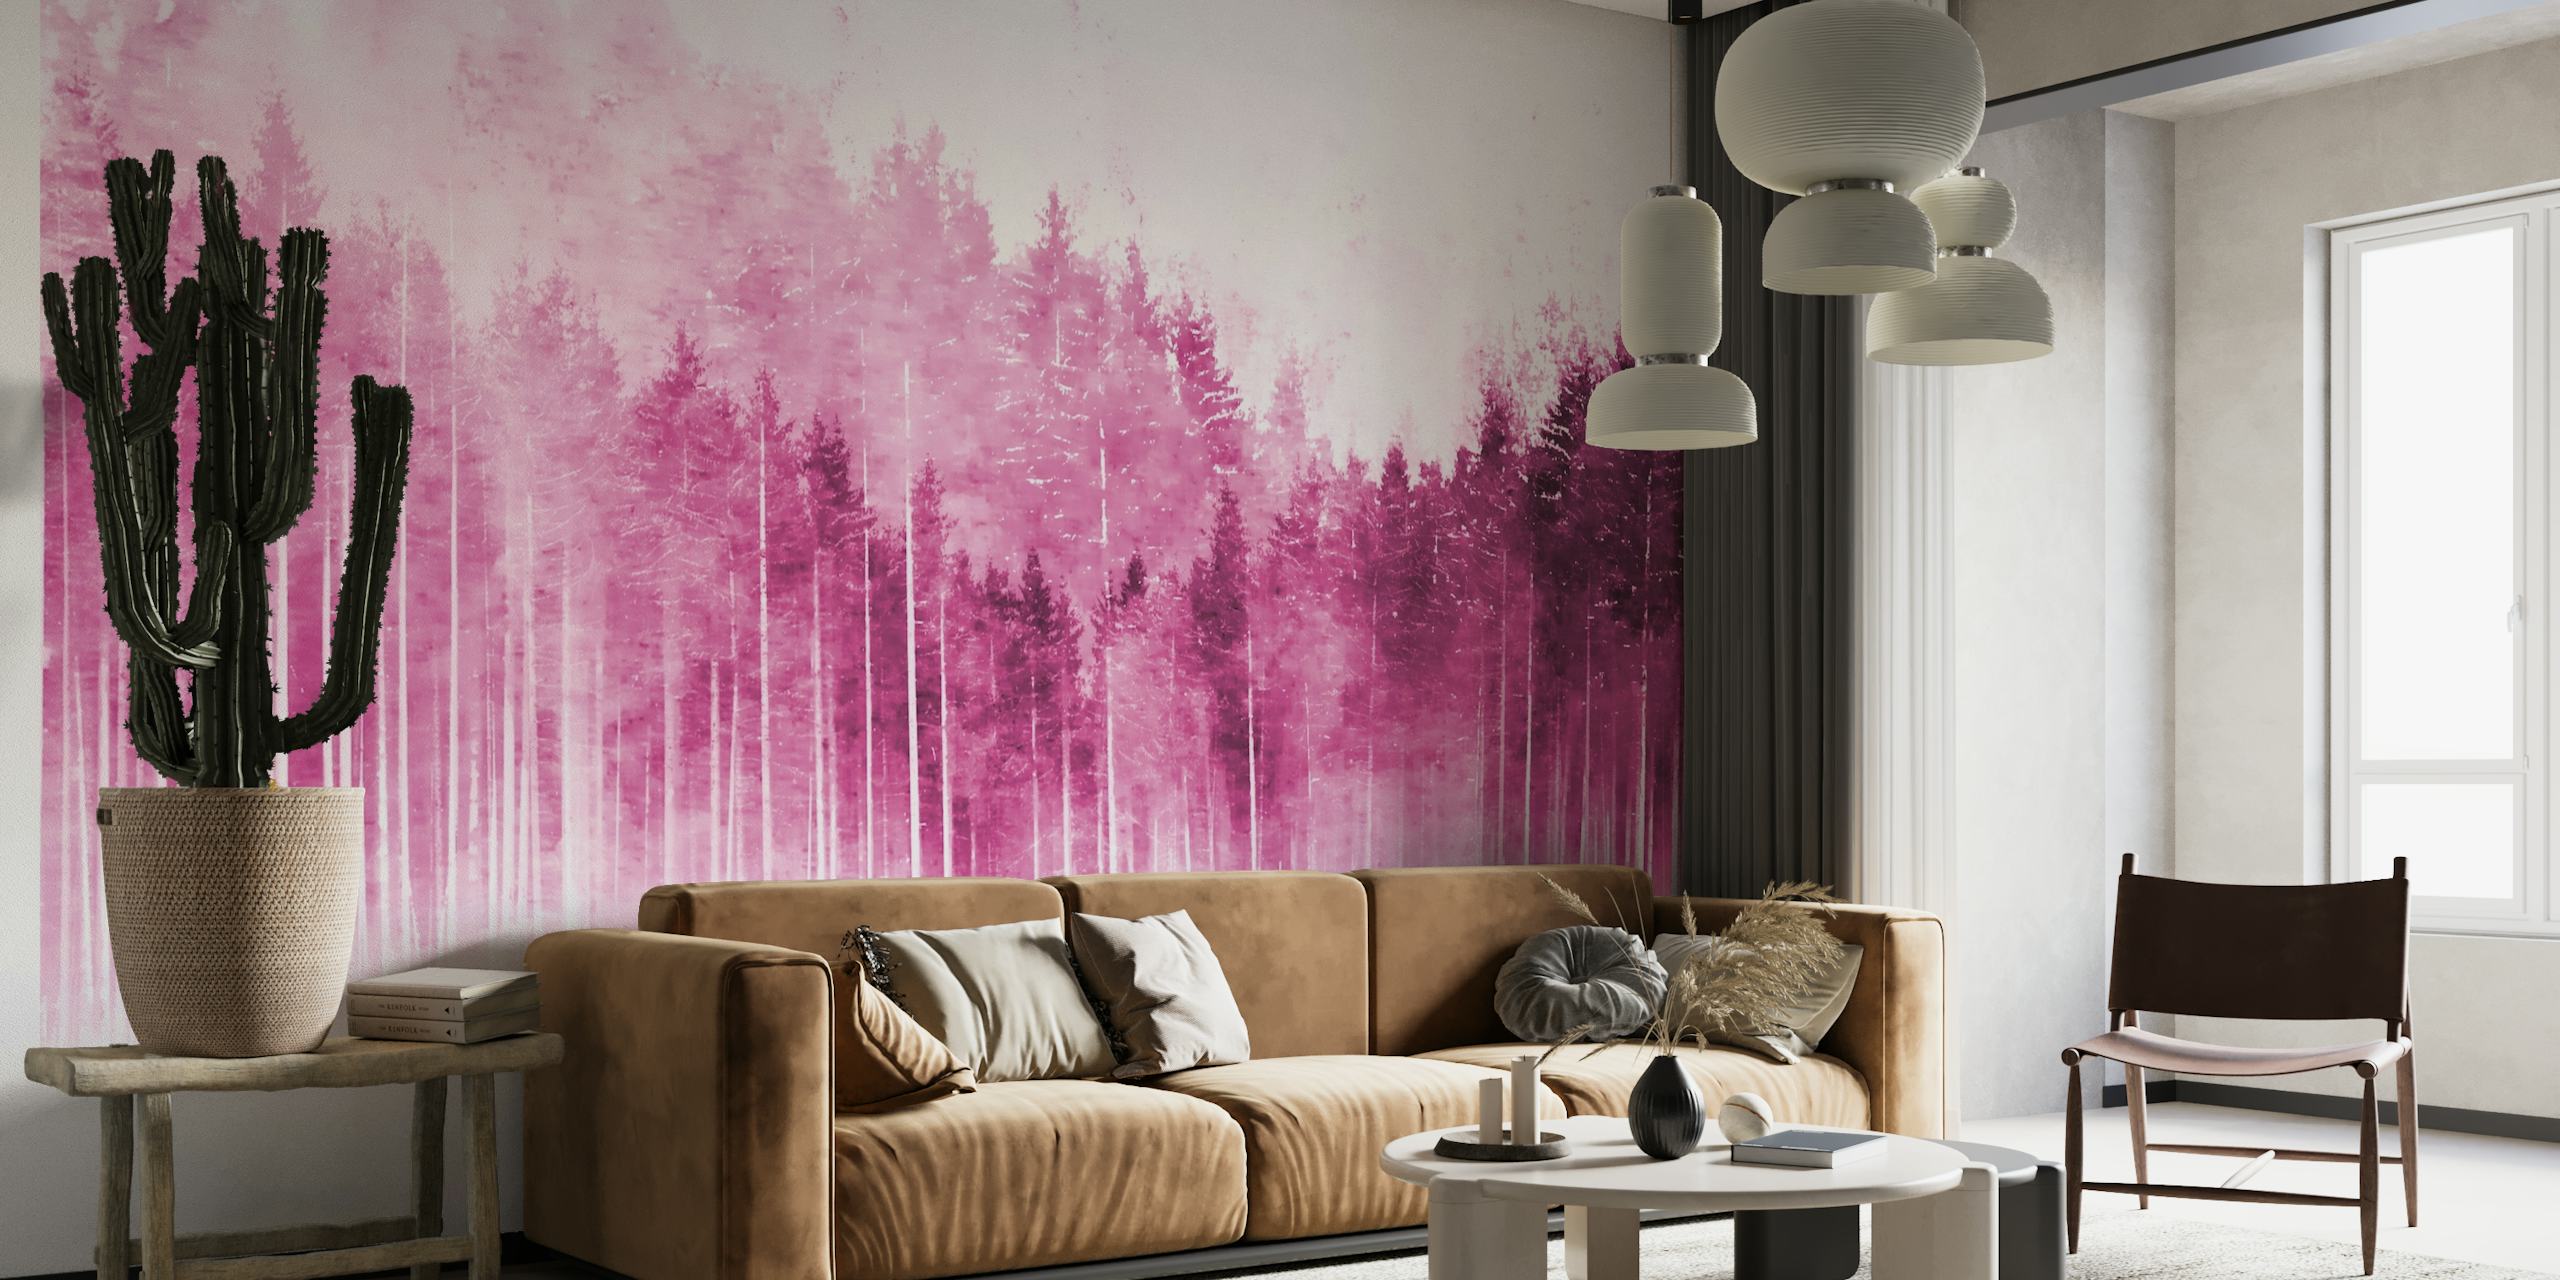 Magenta pine forest silhouette wall mural at happywall.com